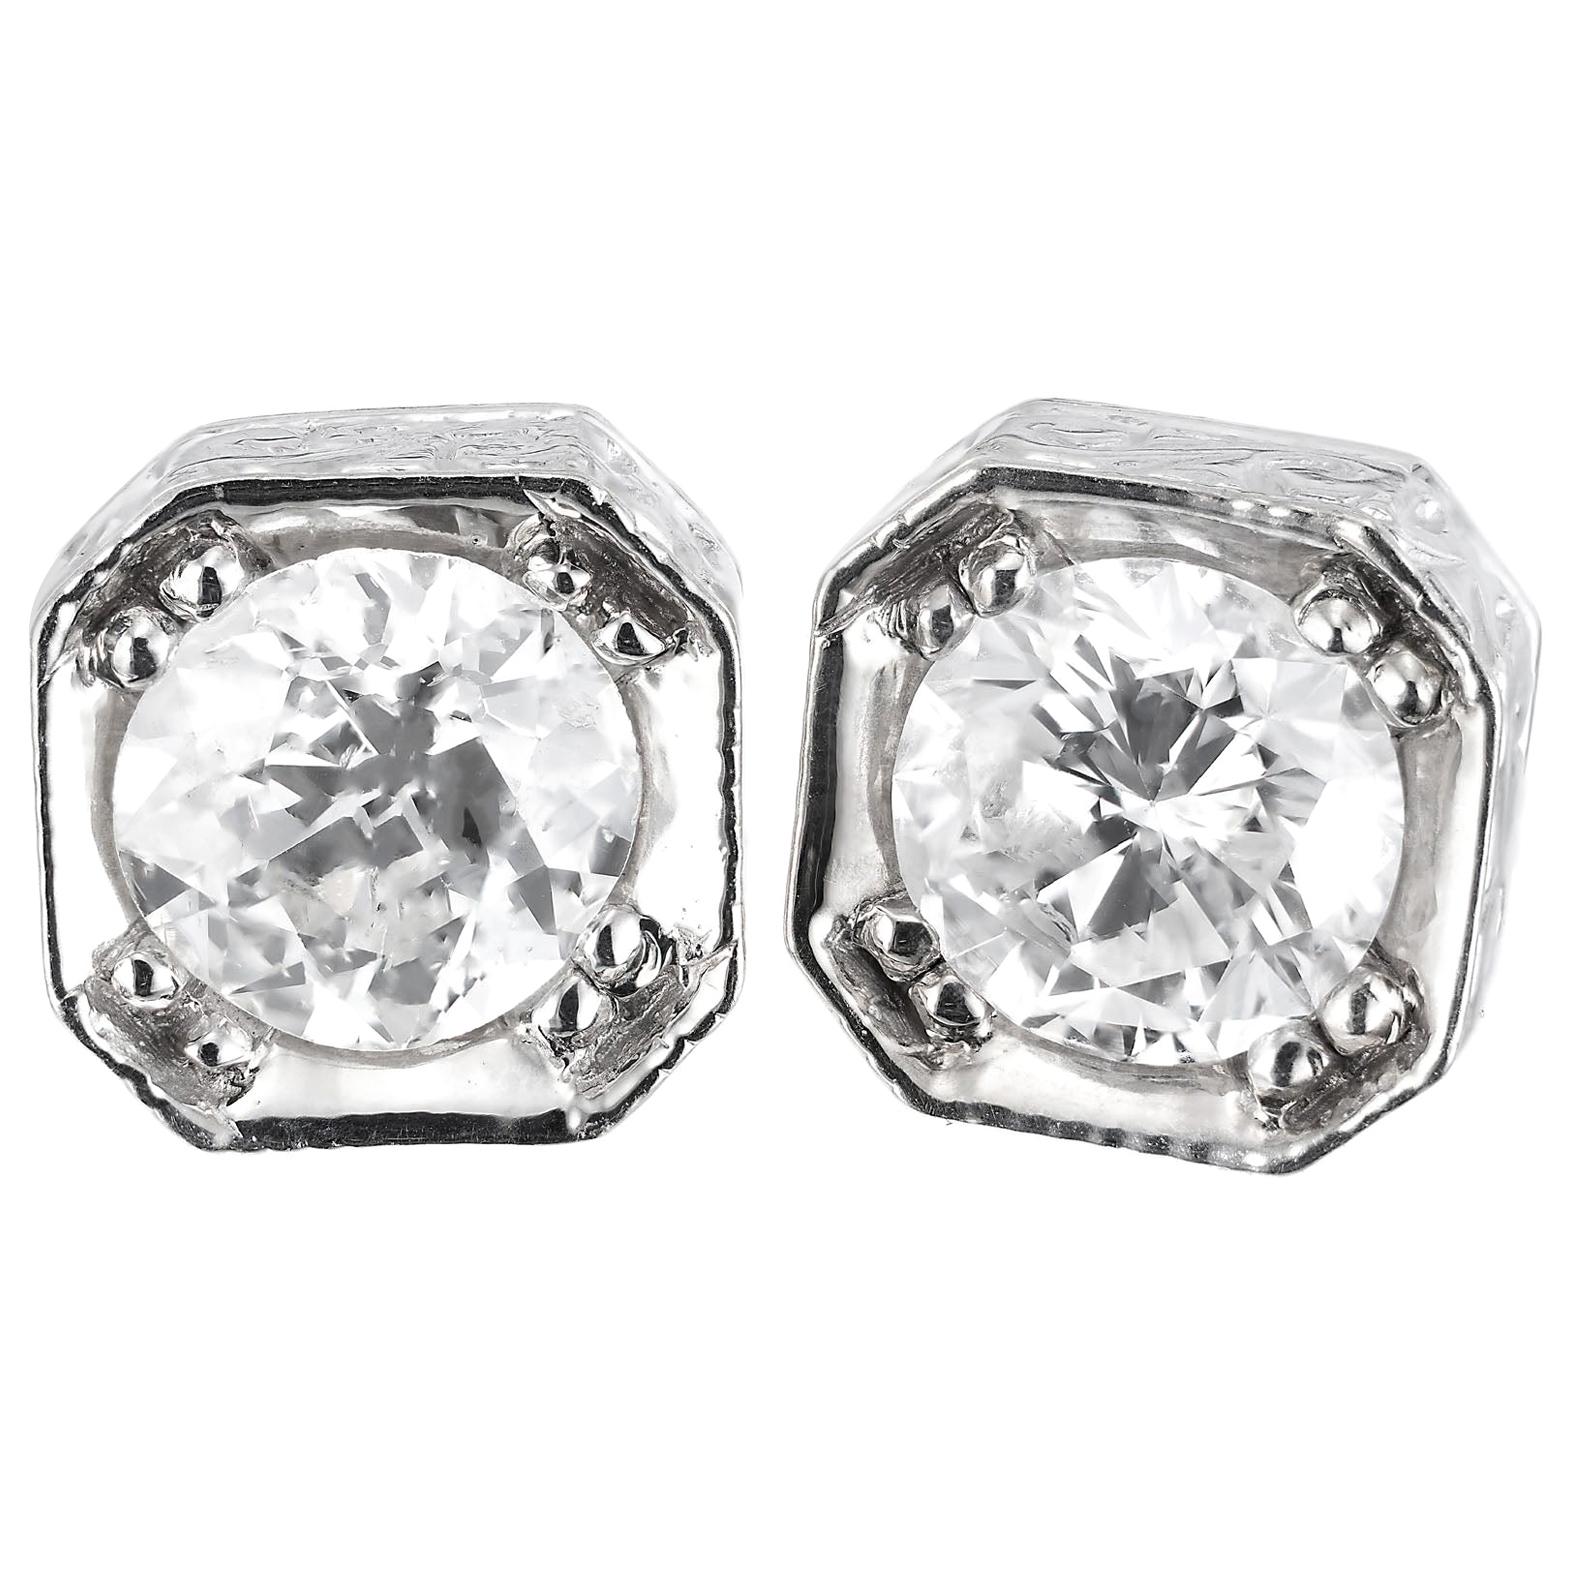 Peter Suchy 1.22 Carat Diamond Antique Inspired Gold Stud Earrings